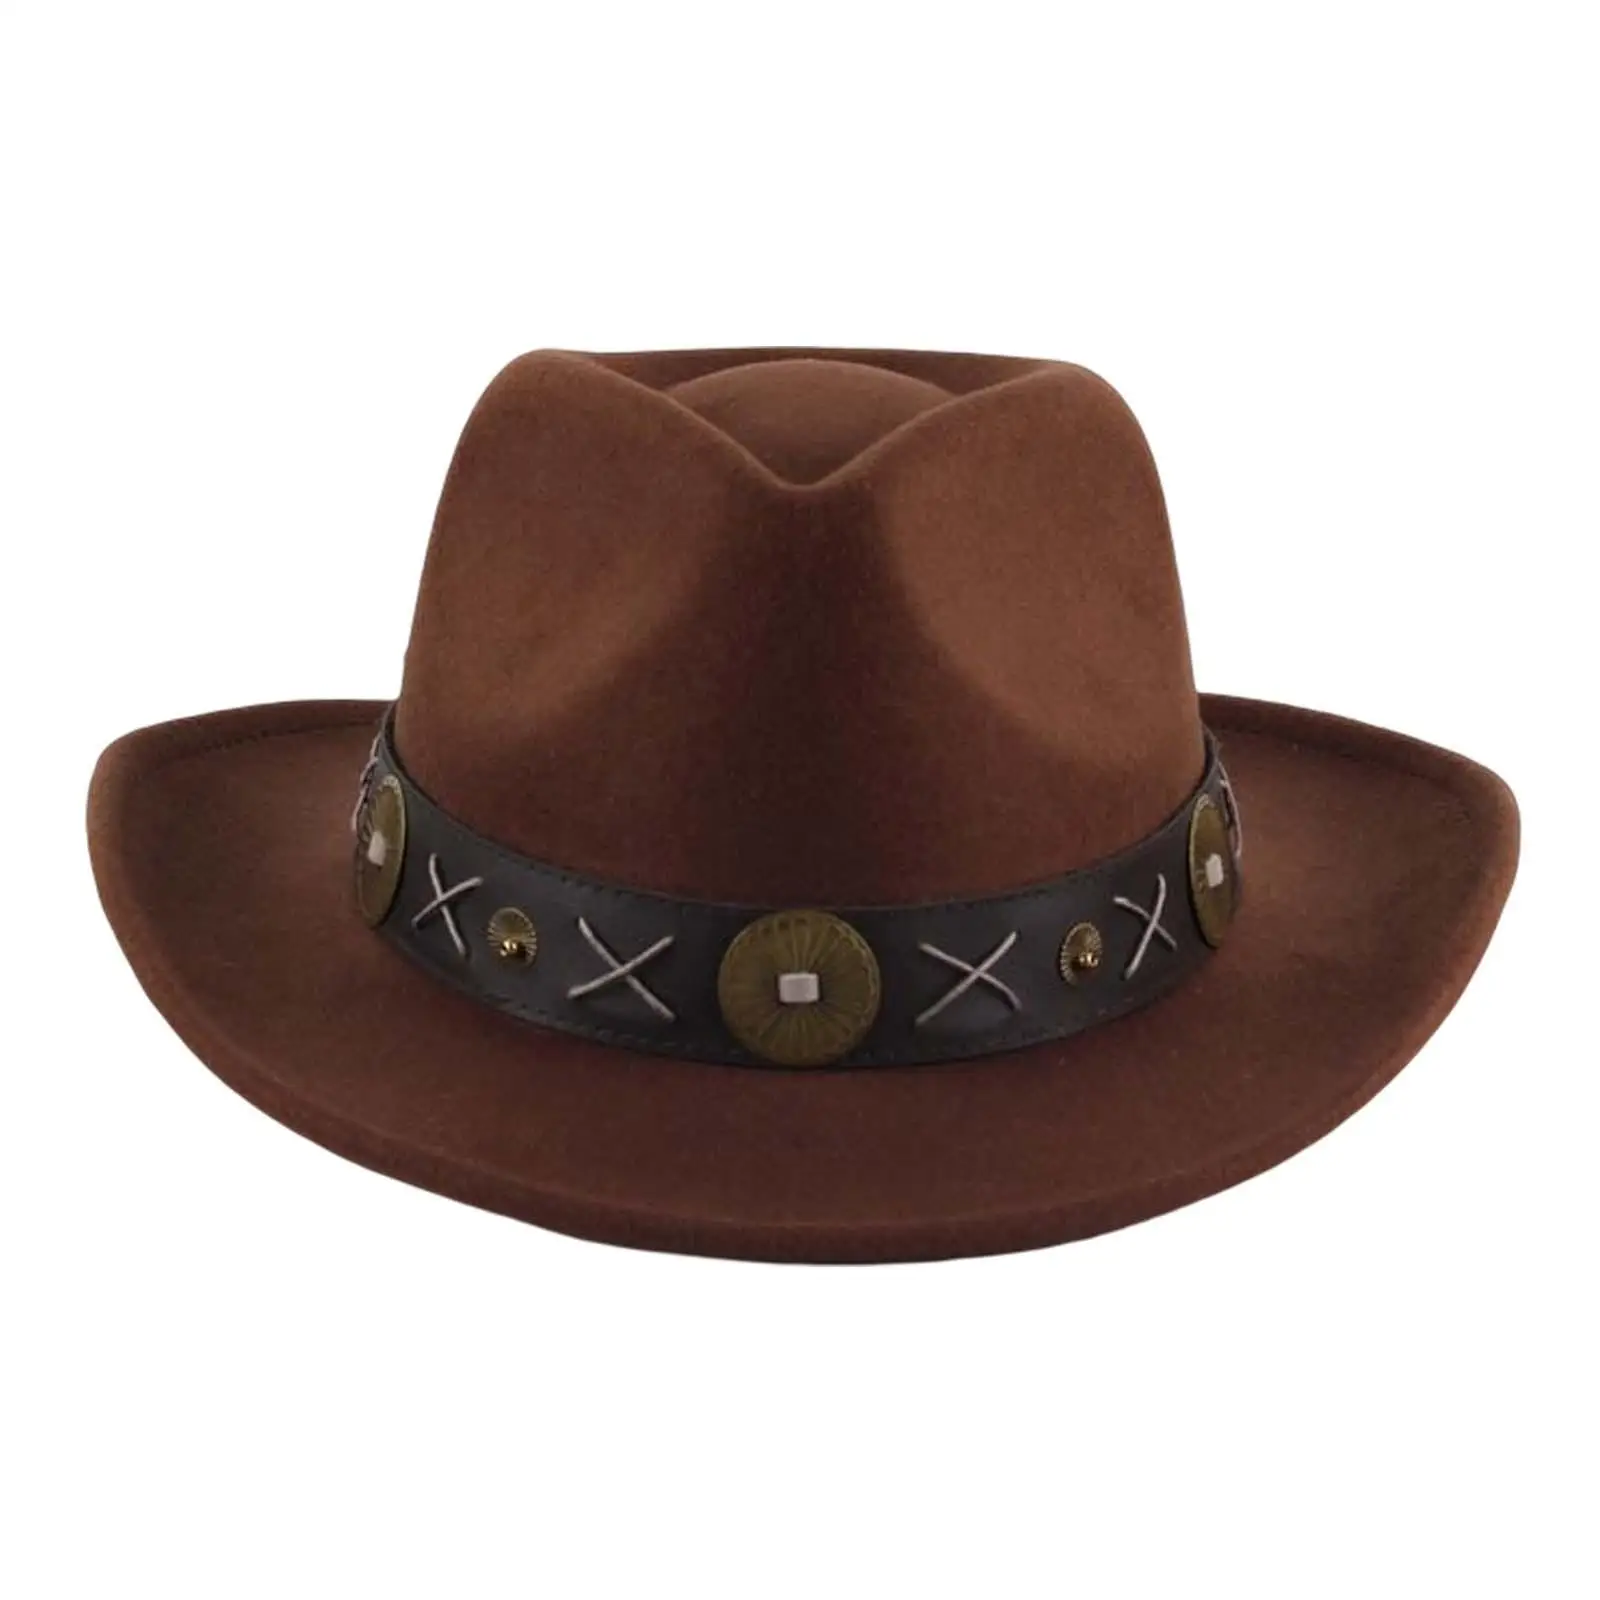 Western Cowboy Hat Novelty Comfortable Wide Brim Breathable Decor Cowgirl Hat for Men Fall Costume Accessories Winter Travel